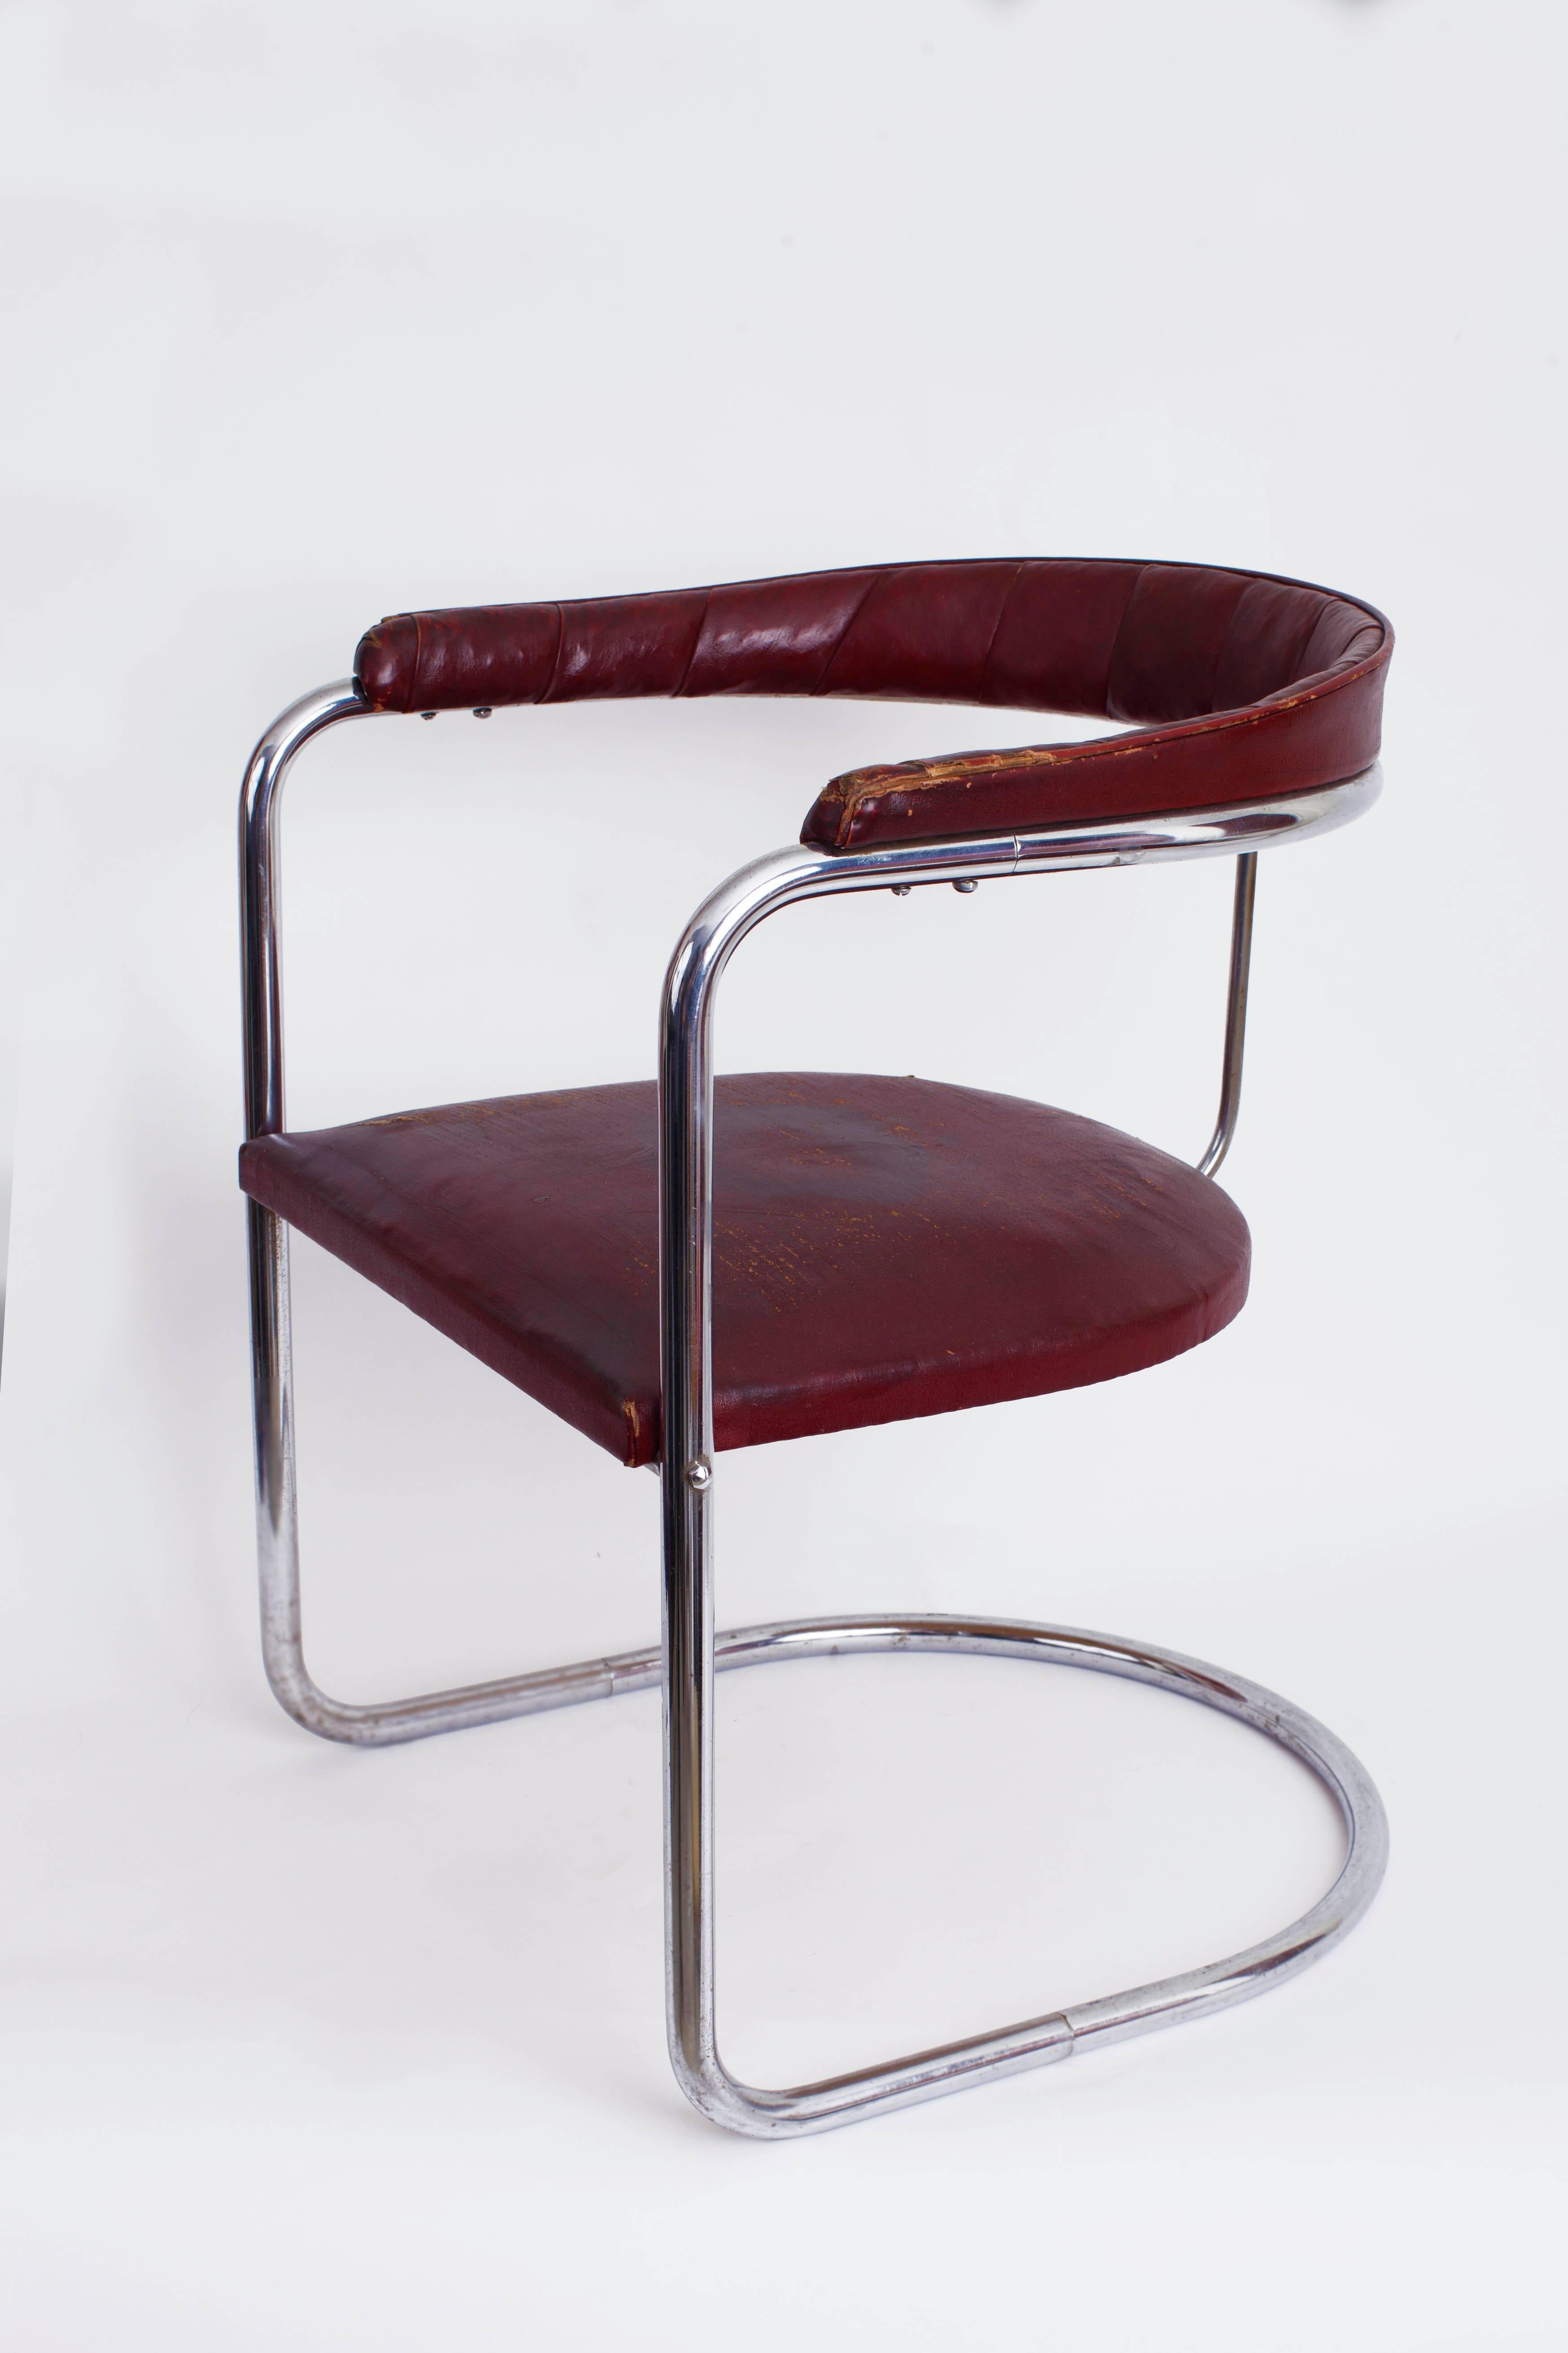 Leather Original Anton Lorenz for Thonet Cantilevered Steel Tube SS33 Chair, 1930s For Sale